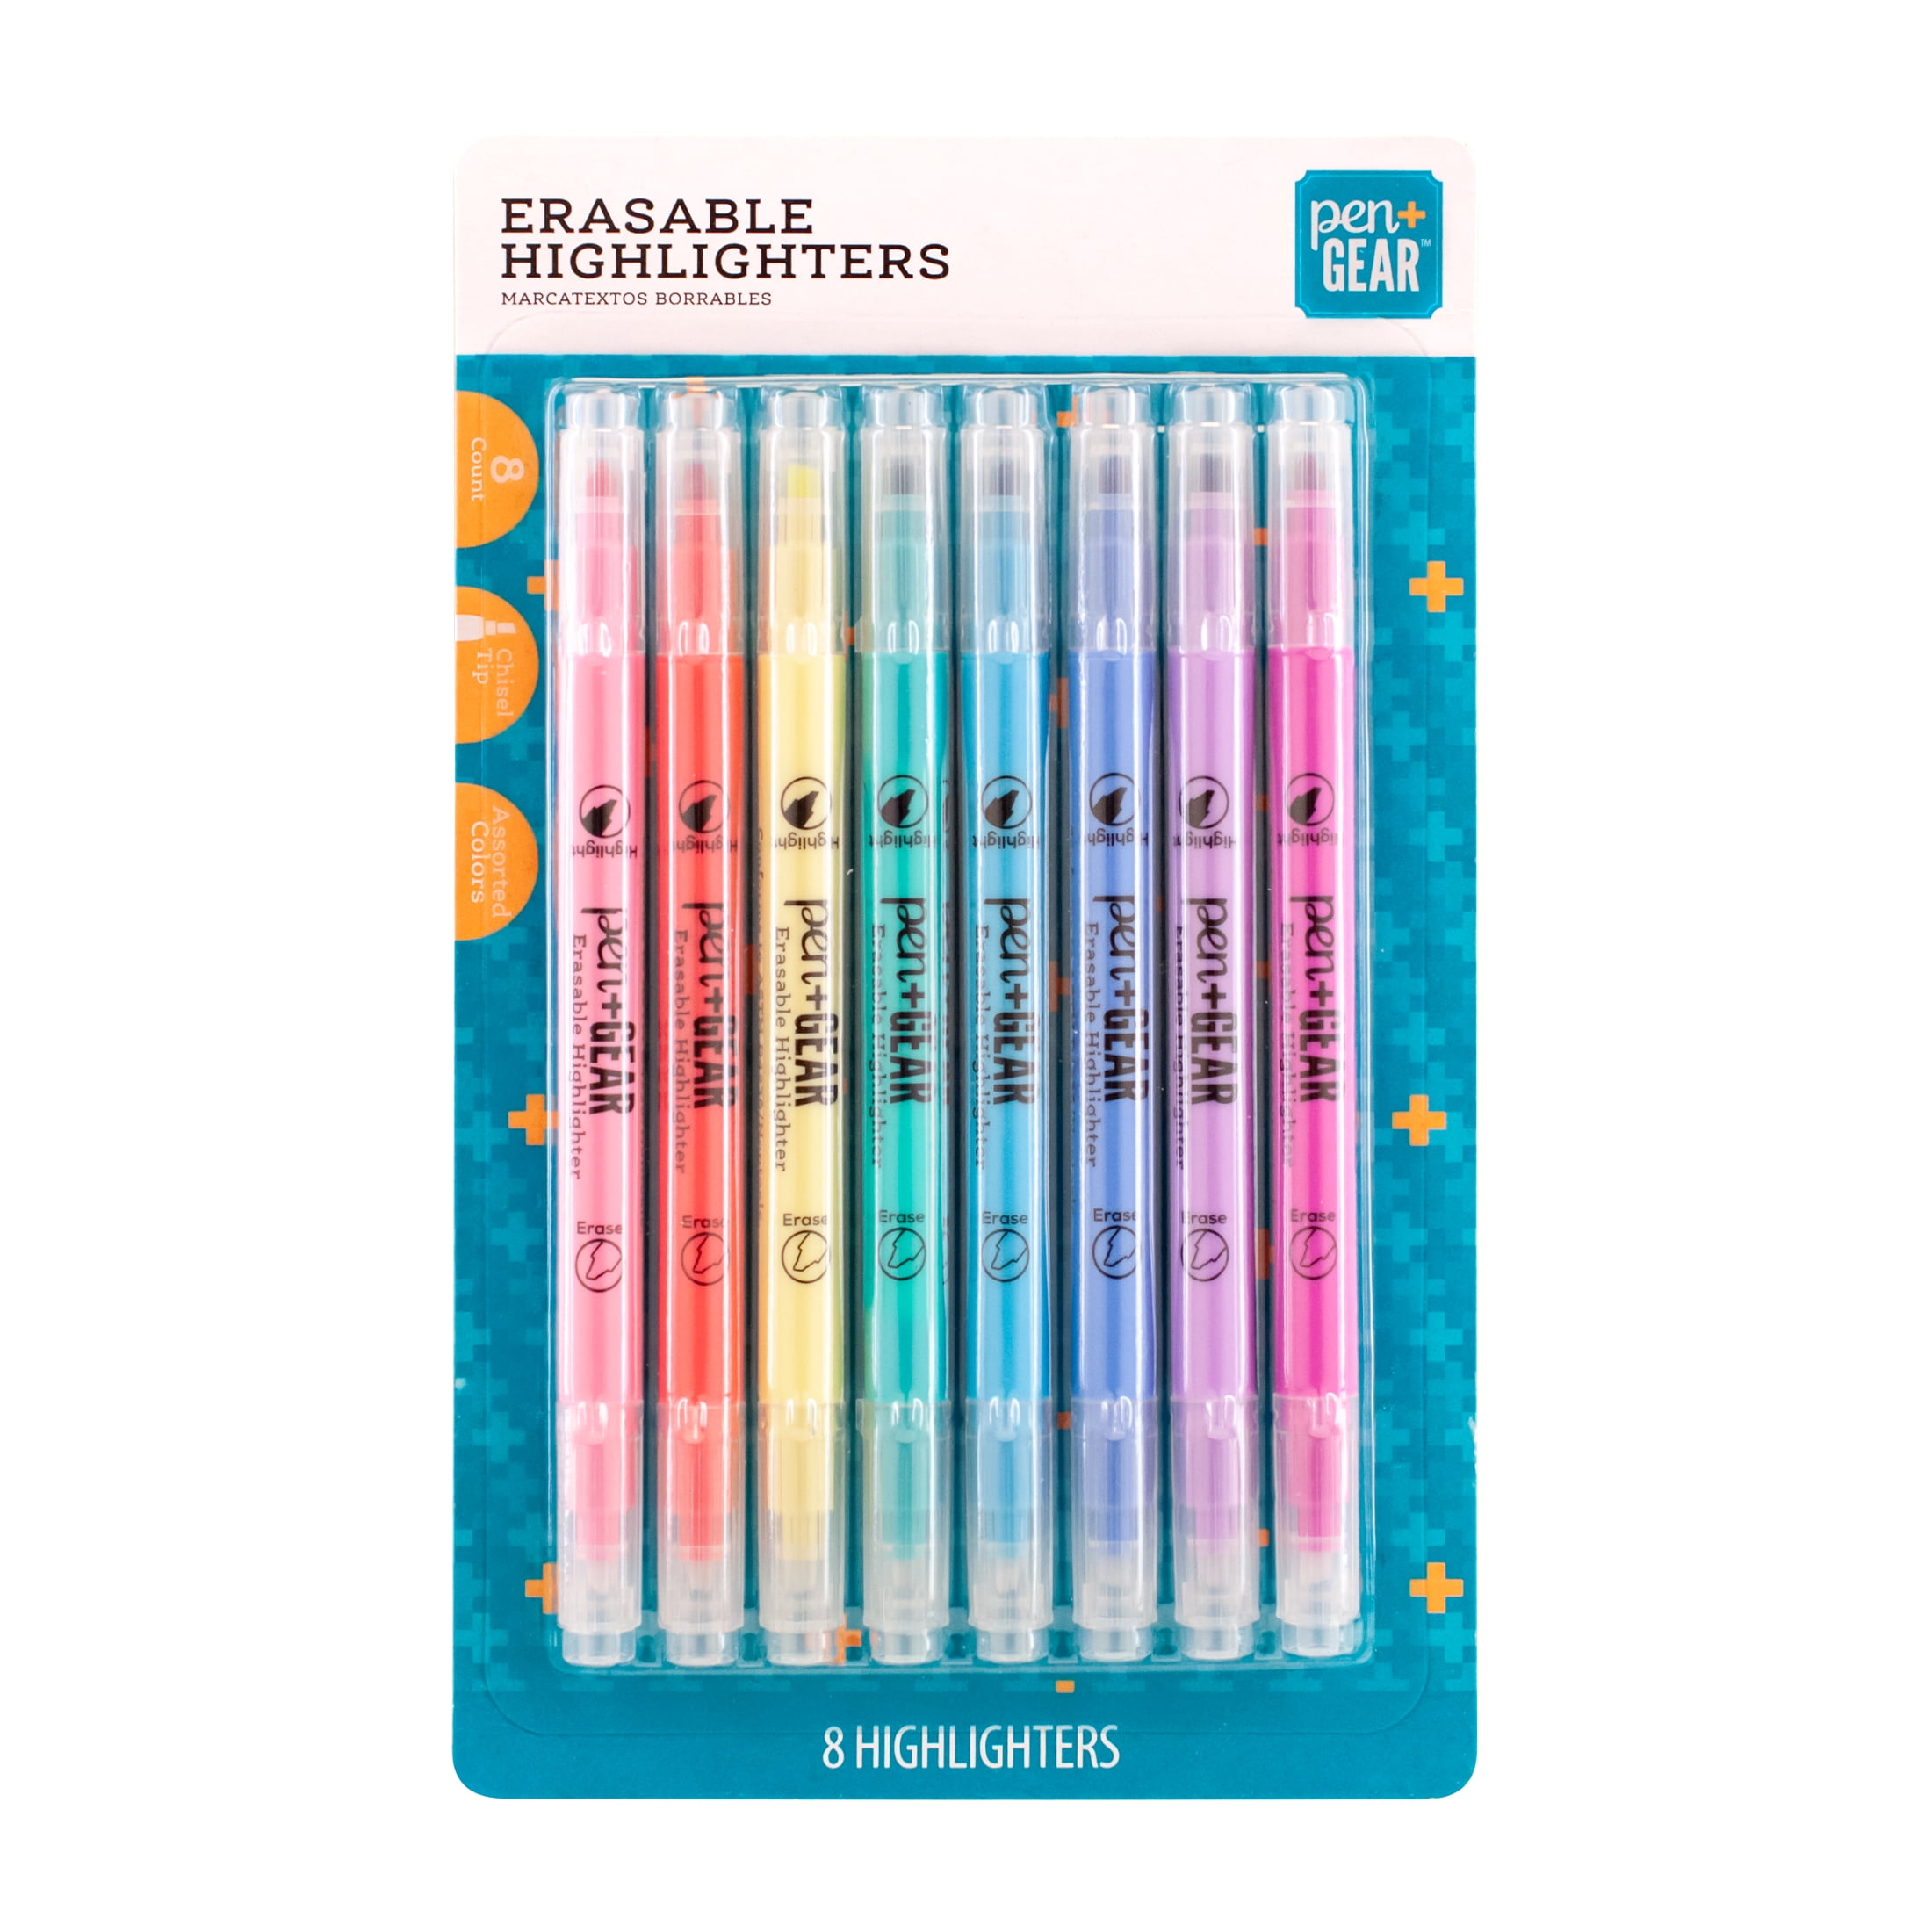 Erasable Highlighters School Office Home Supplies Stationery Markers Arts&Crafts